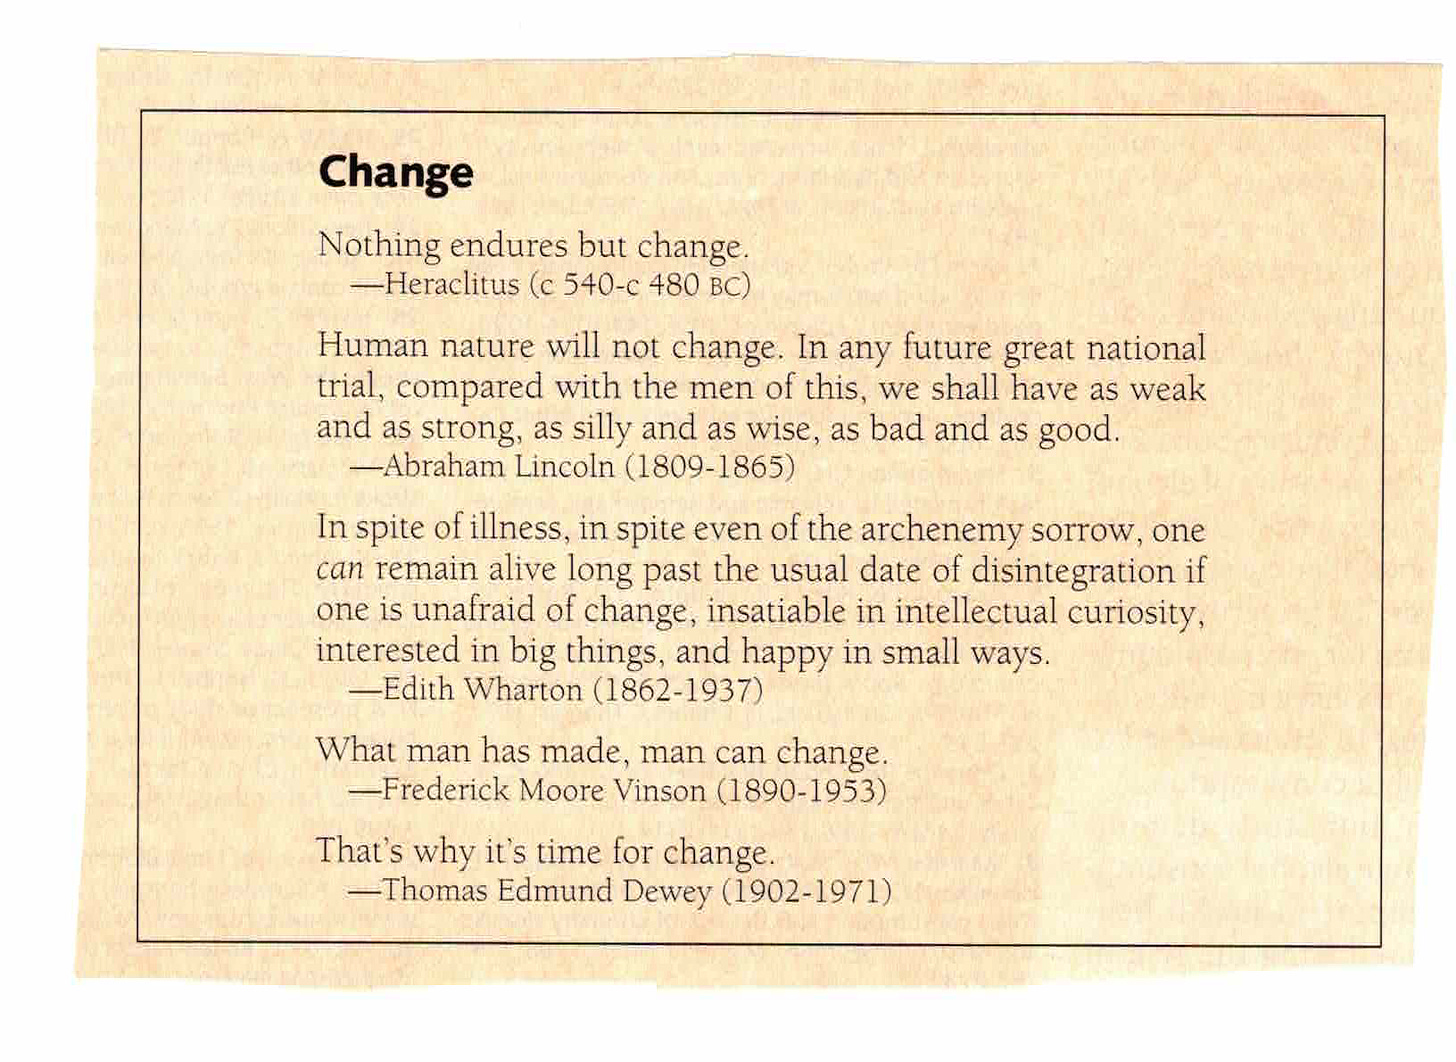 Change Nothing endures but change. -Heraclitus (c 540-c 480 BC) Human nature will not change. In any future great national trial, compared with the men of this, we shall have as weak and as strong, as silly and as wise, as bad and as good. -Abraham Lincoln (1809-1865) In spite of illness, in spite even of the archenemy sorrow, one can remain alive long past the usual date of disintegration if one is unafraid of change, insatiable in intellectual curiosity, interested in big things, and happy in small ways. Edith Wharton (1862-1937) What man has made, man can change. -Frederick Moore Vinson (1890-1953) That's why it's time for change. -Thomas Edmund Dewey (1902-1971)